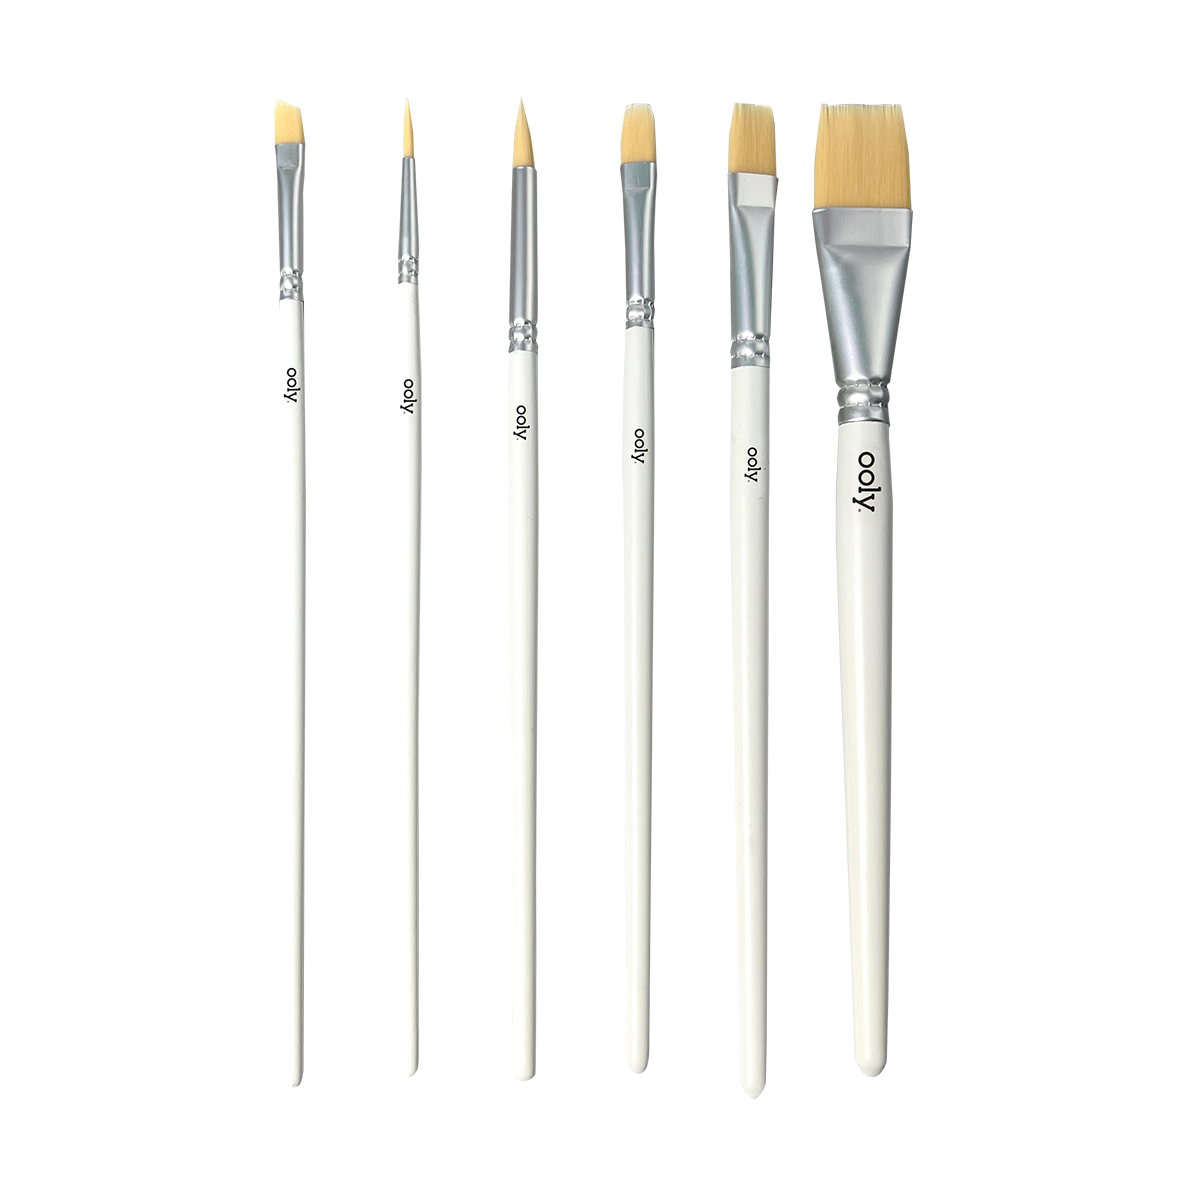 Chroma Blends Watercolor Paint Brushes - Set of 6 by OOLY